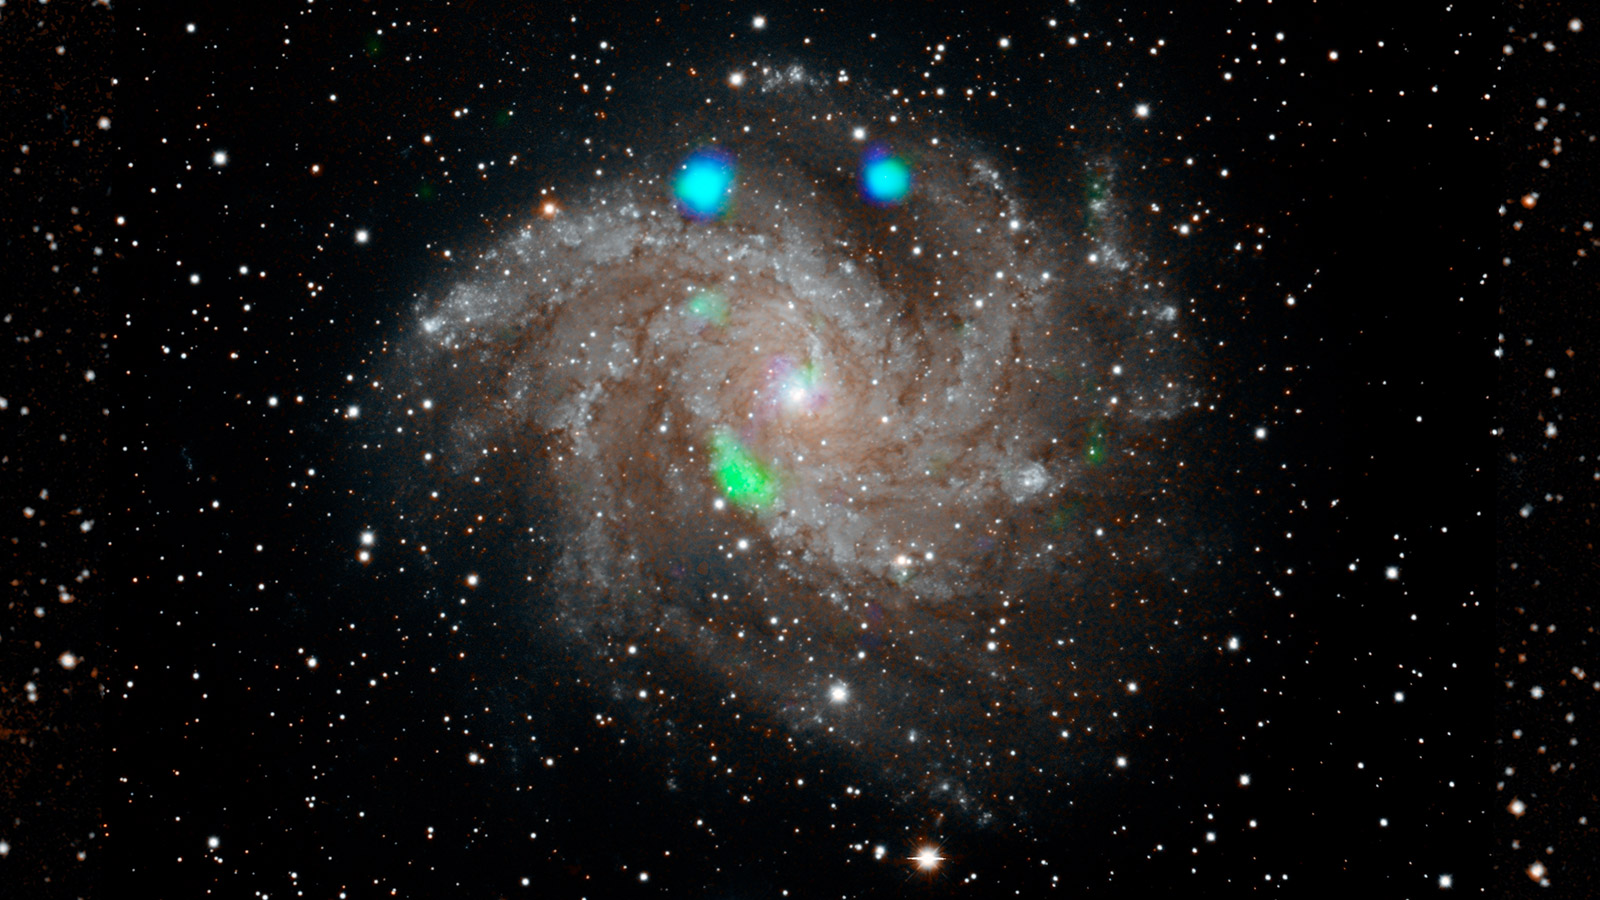 This visible-light image of the Fireworks galaxy (NGC 6946) comes from the Digital Sky Survey, and is overlaid with data from NA